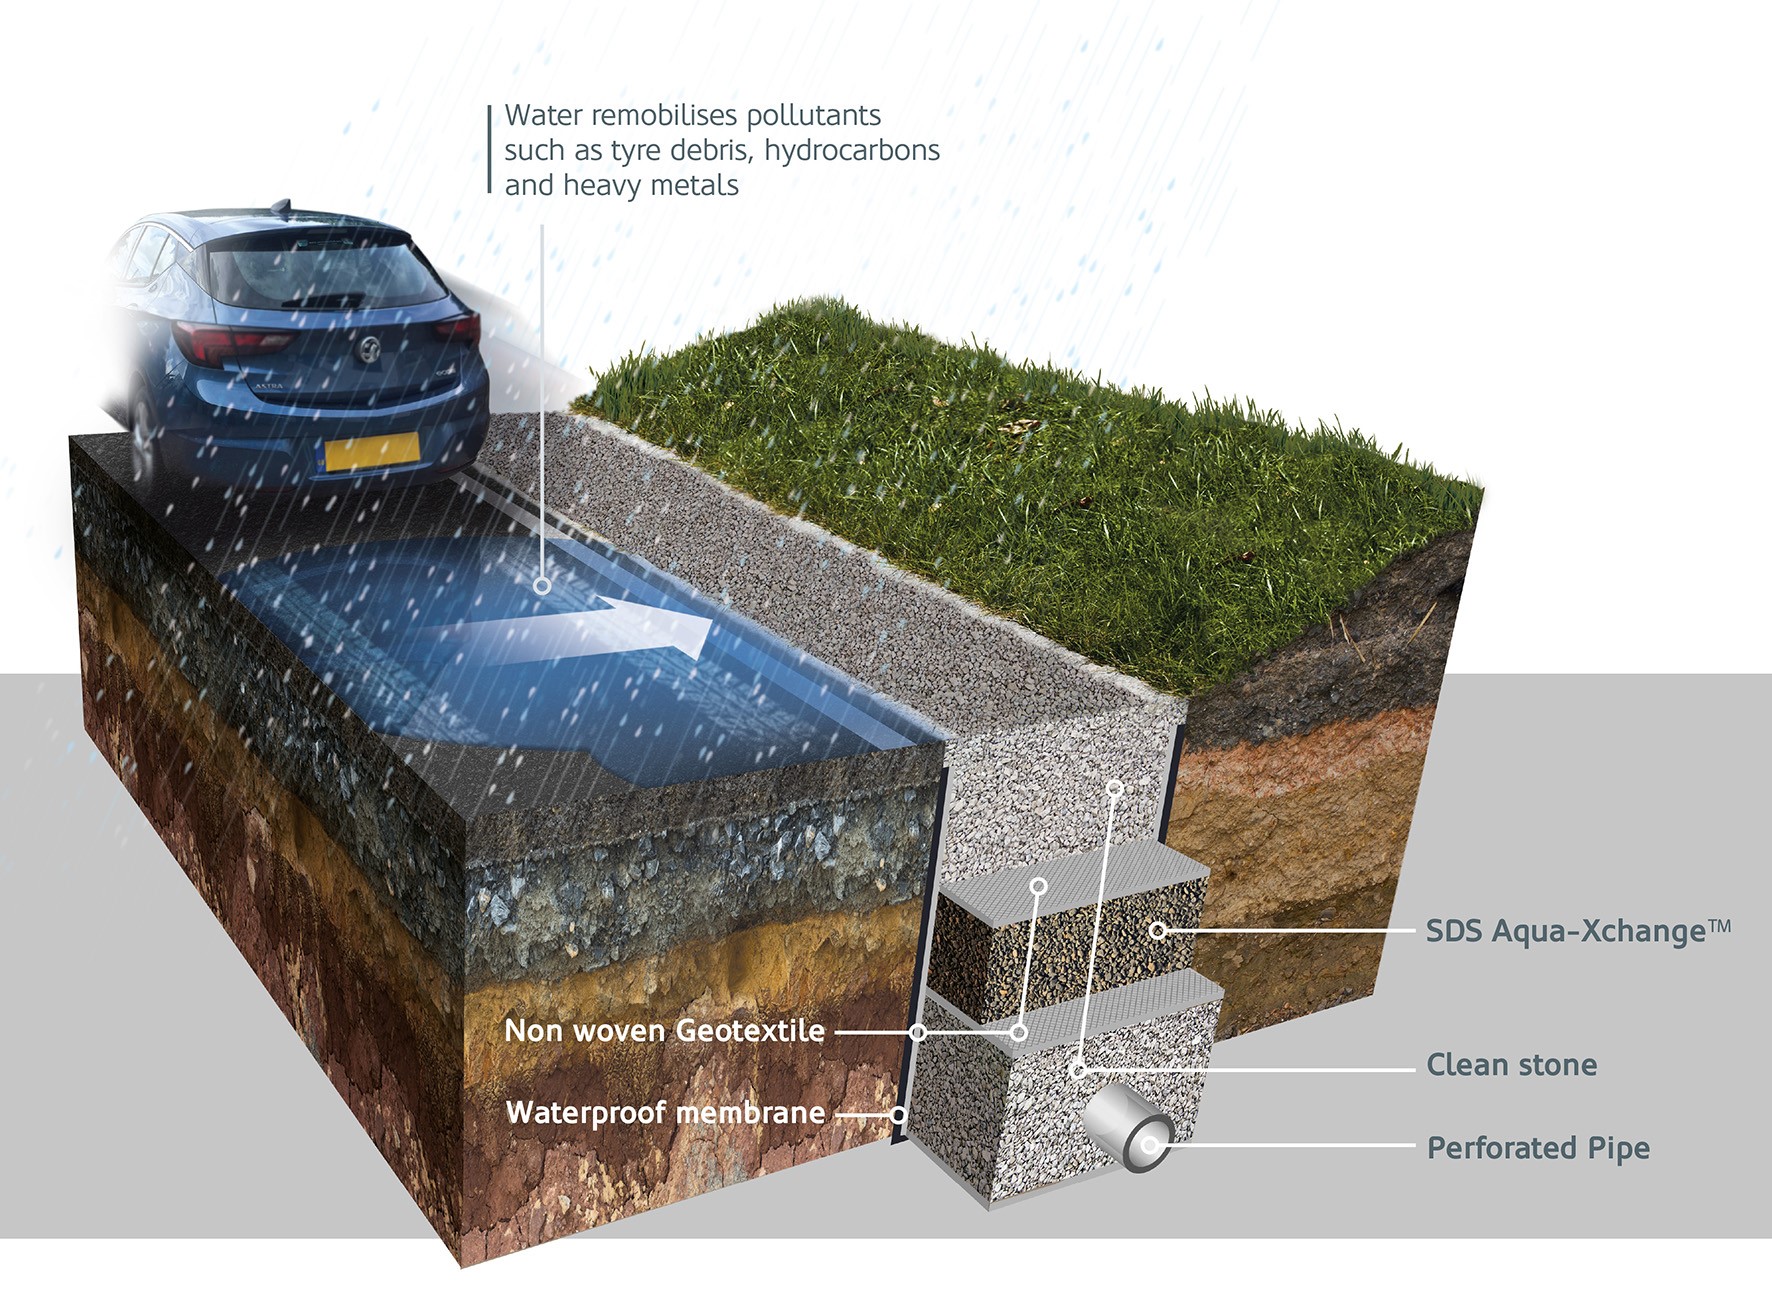 The SDS Aqua-Xchange can be integrated to remove metals pollution as part of highway filter drainage.